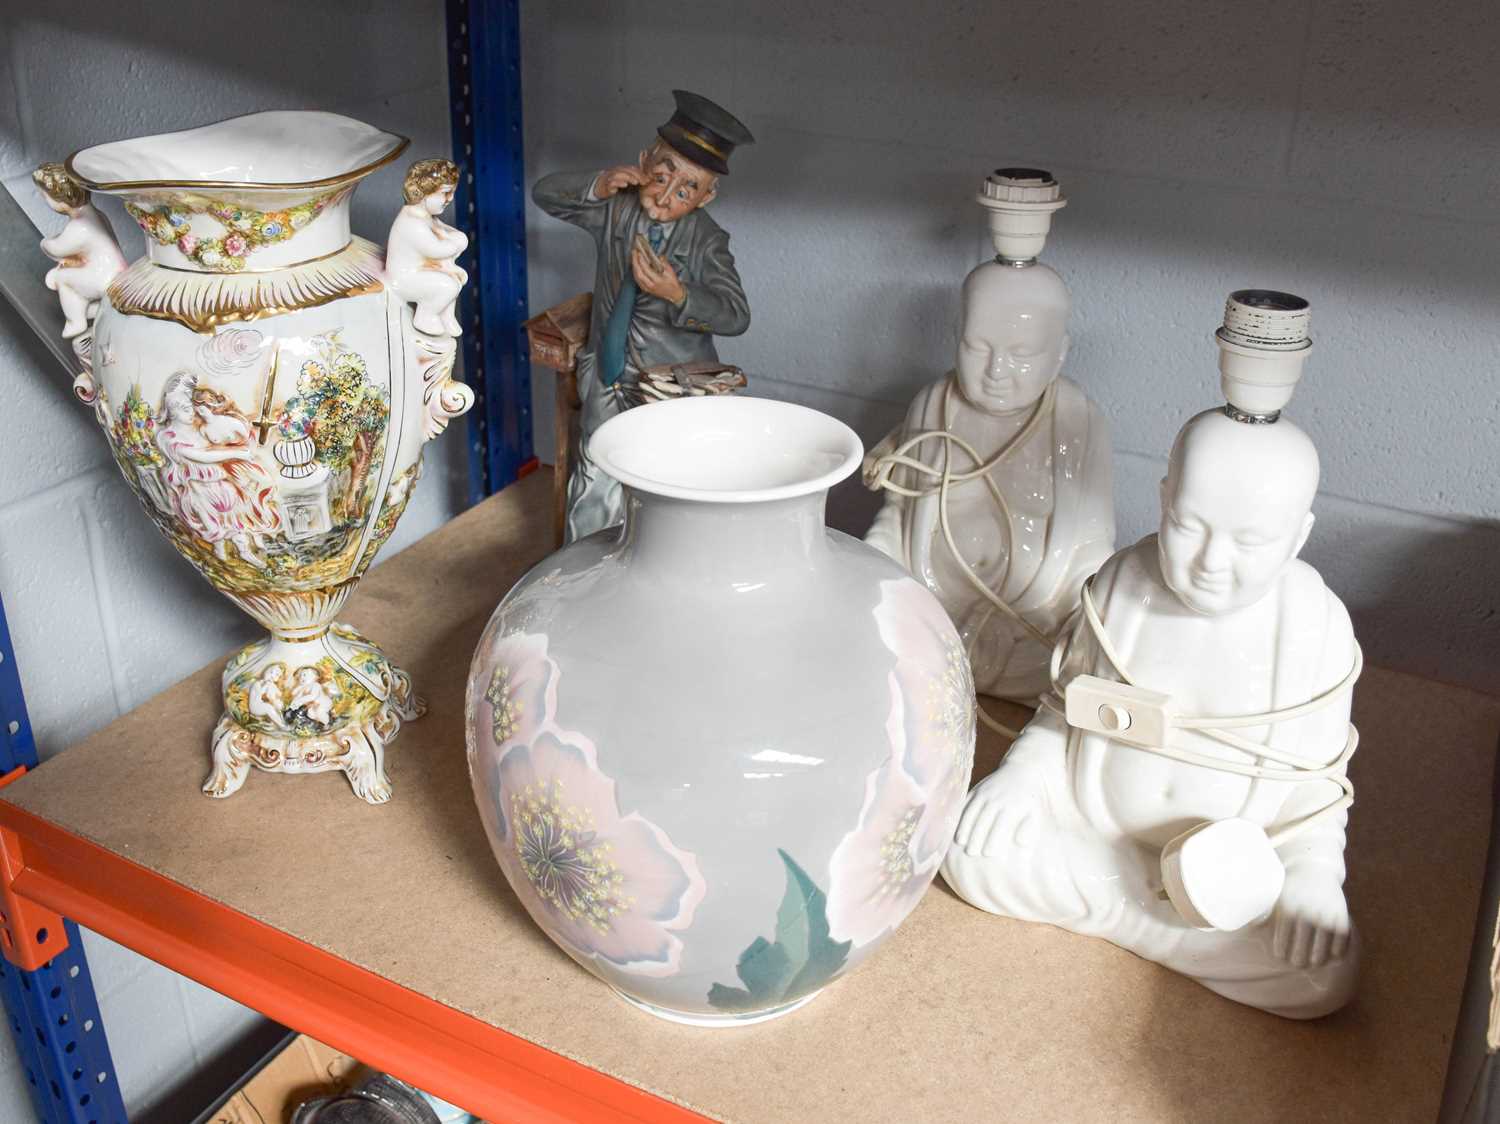 A Large Lladro Vase. capodimonte vase, capidomonte figure and pair of buddah lamps